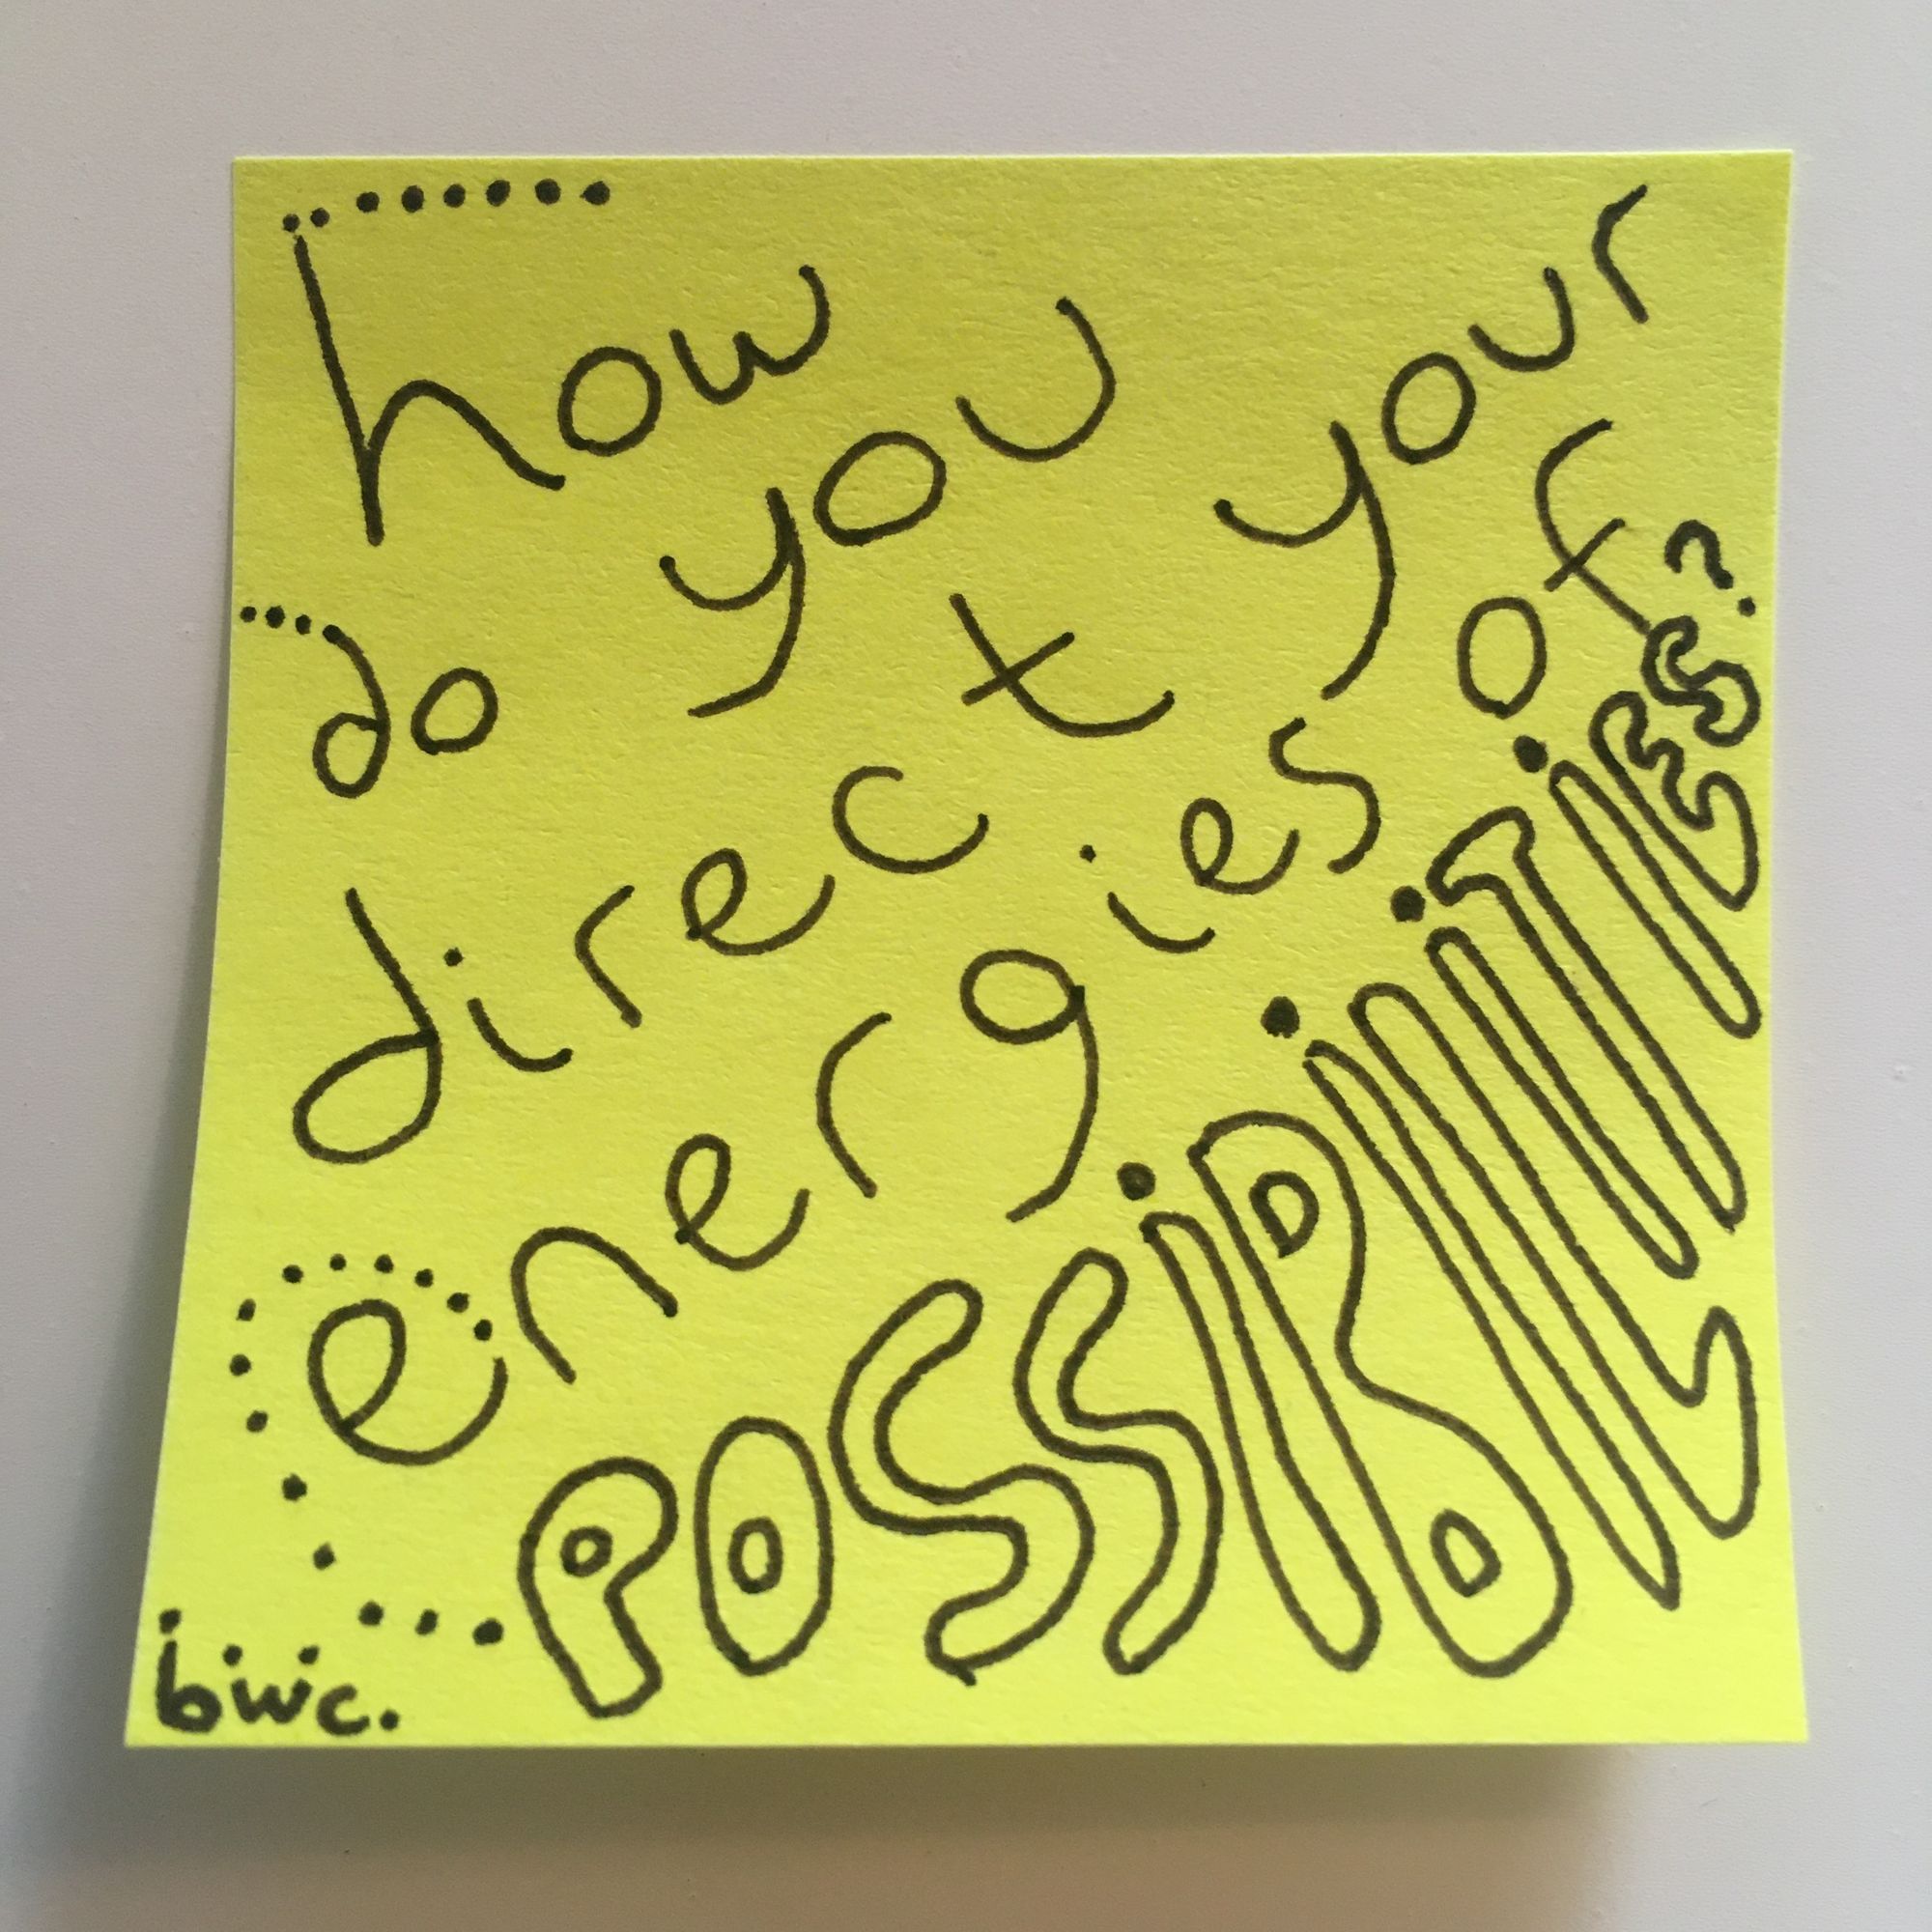 yellow square sticky note with handwritten message that says "how do you direct your energies of possibilities?" possibilities is in bold bubble letters and there are dots off several of the letters suggesting energy being sent out of the letters.